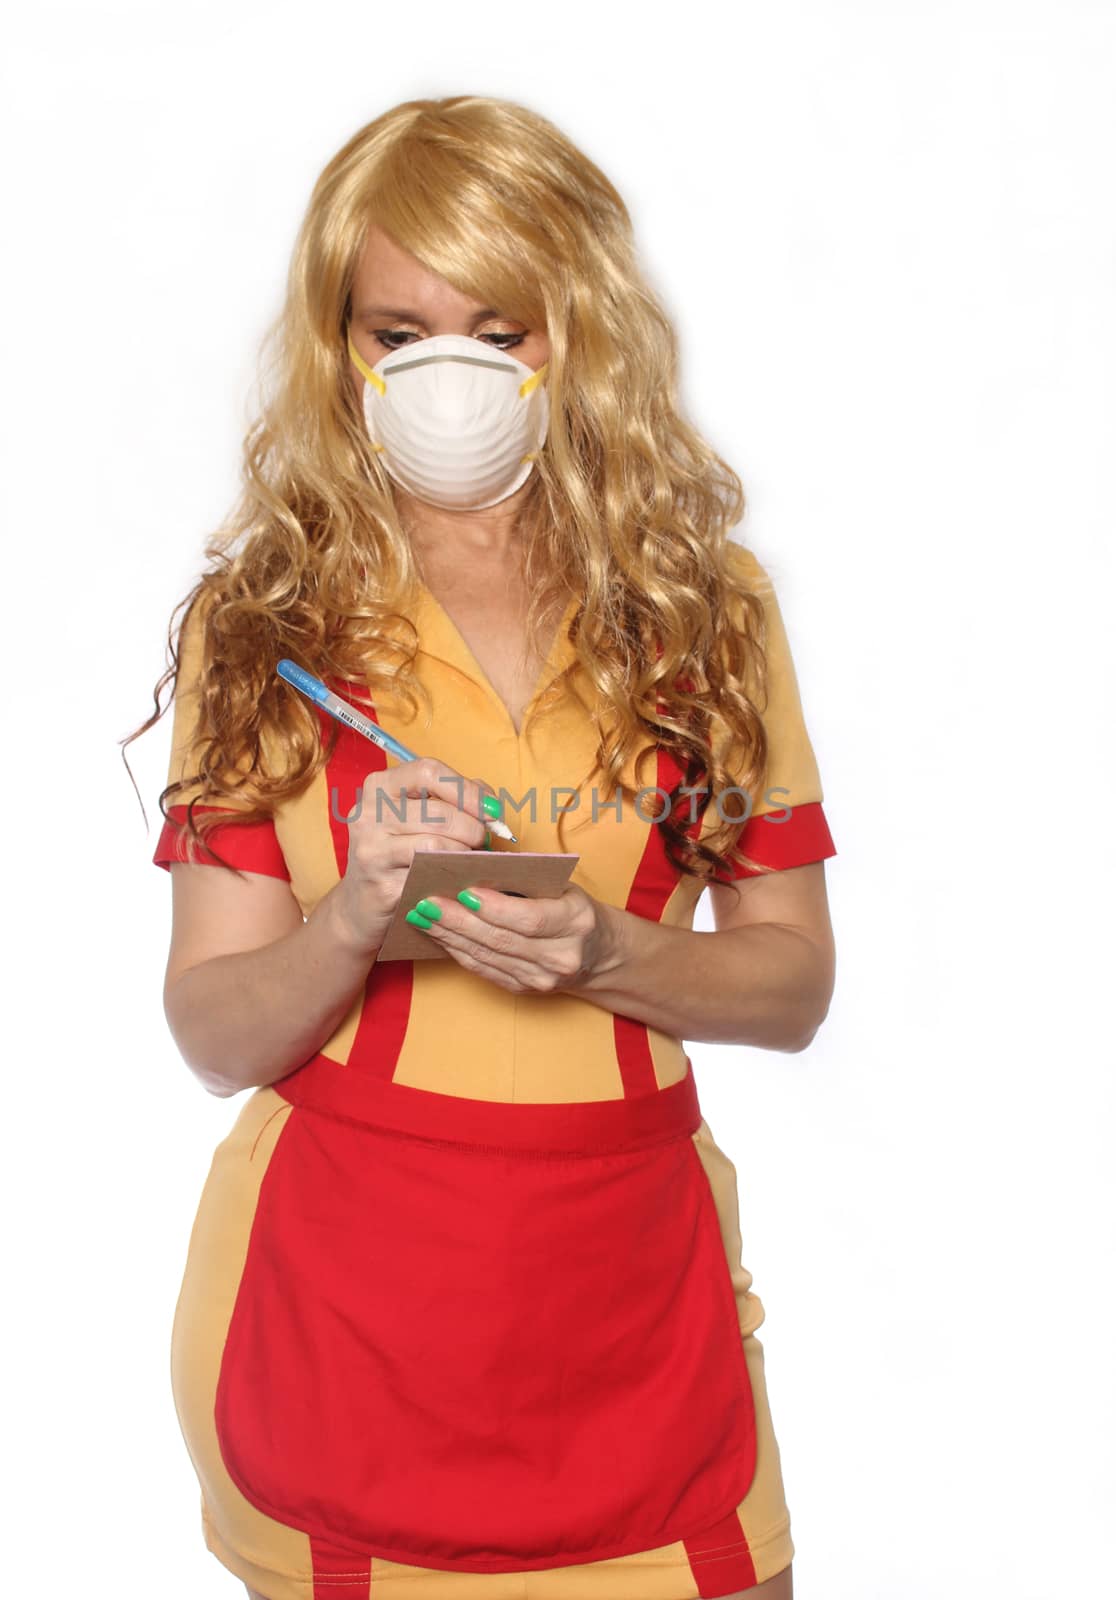 Restaurant and Bar Waitress Wearing Face Mask To Prevent illness by Marti157900